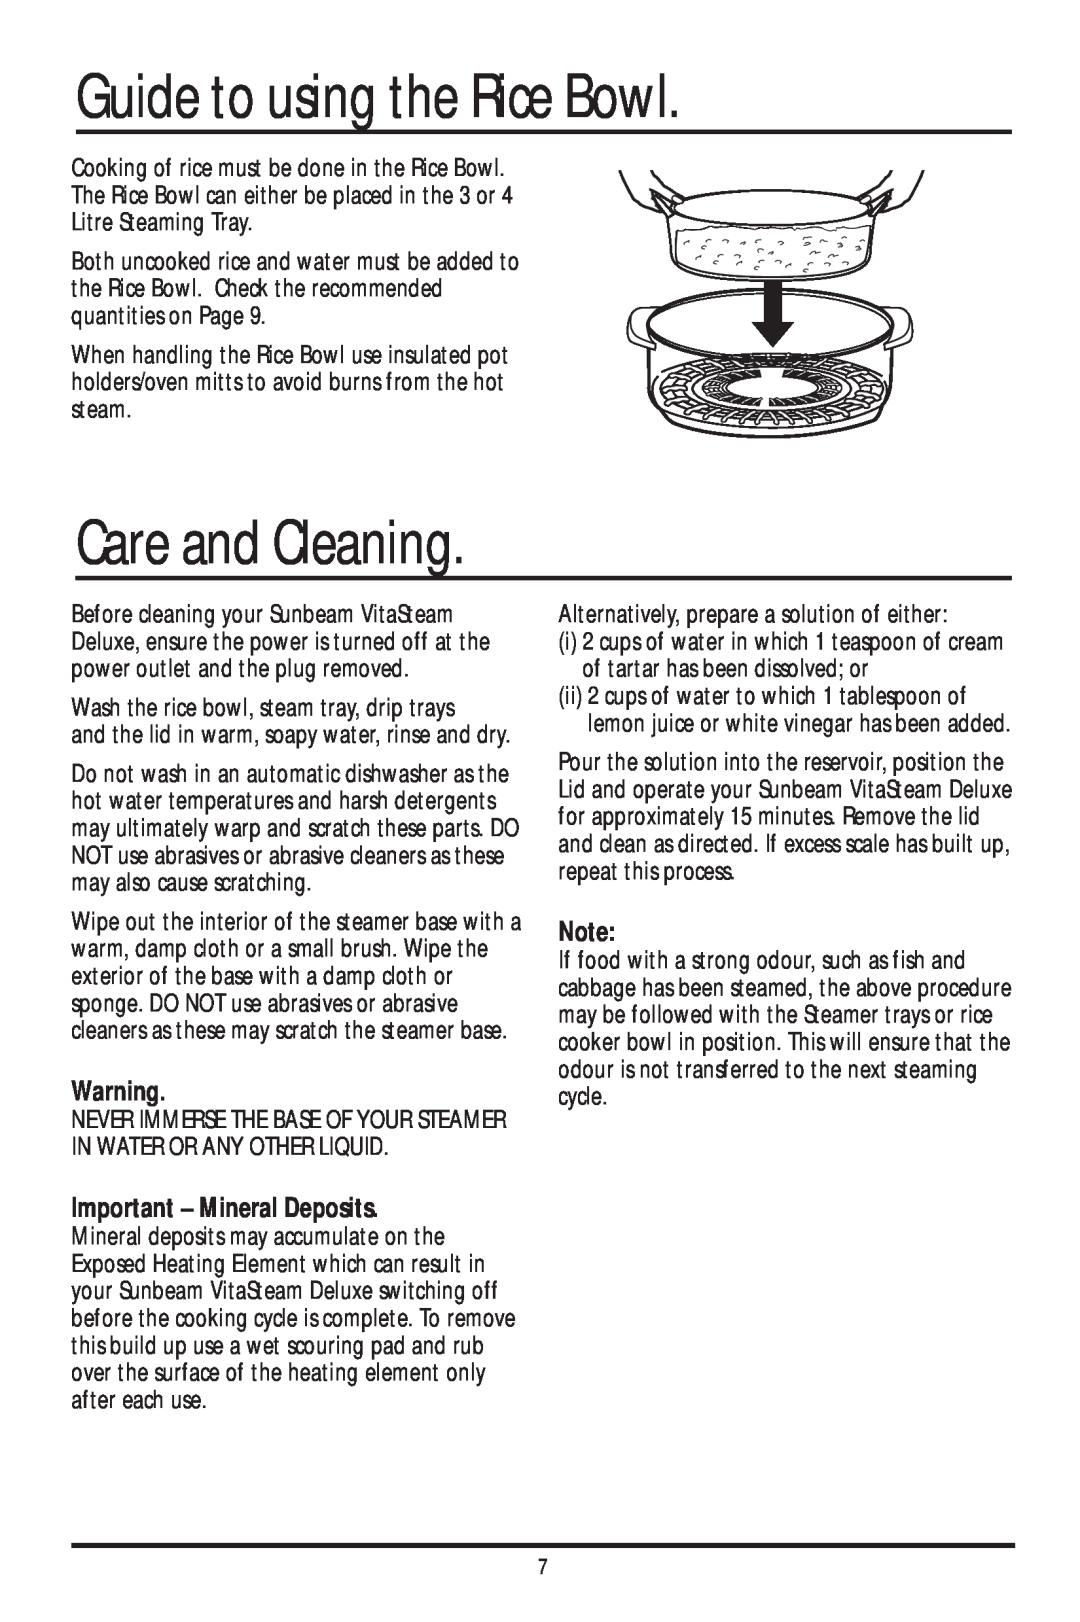 Sunbeam ST6600 manual Guide to using the Rice Bowl, Care and Cleaning, Important - Mineral Deposits 